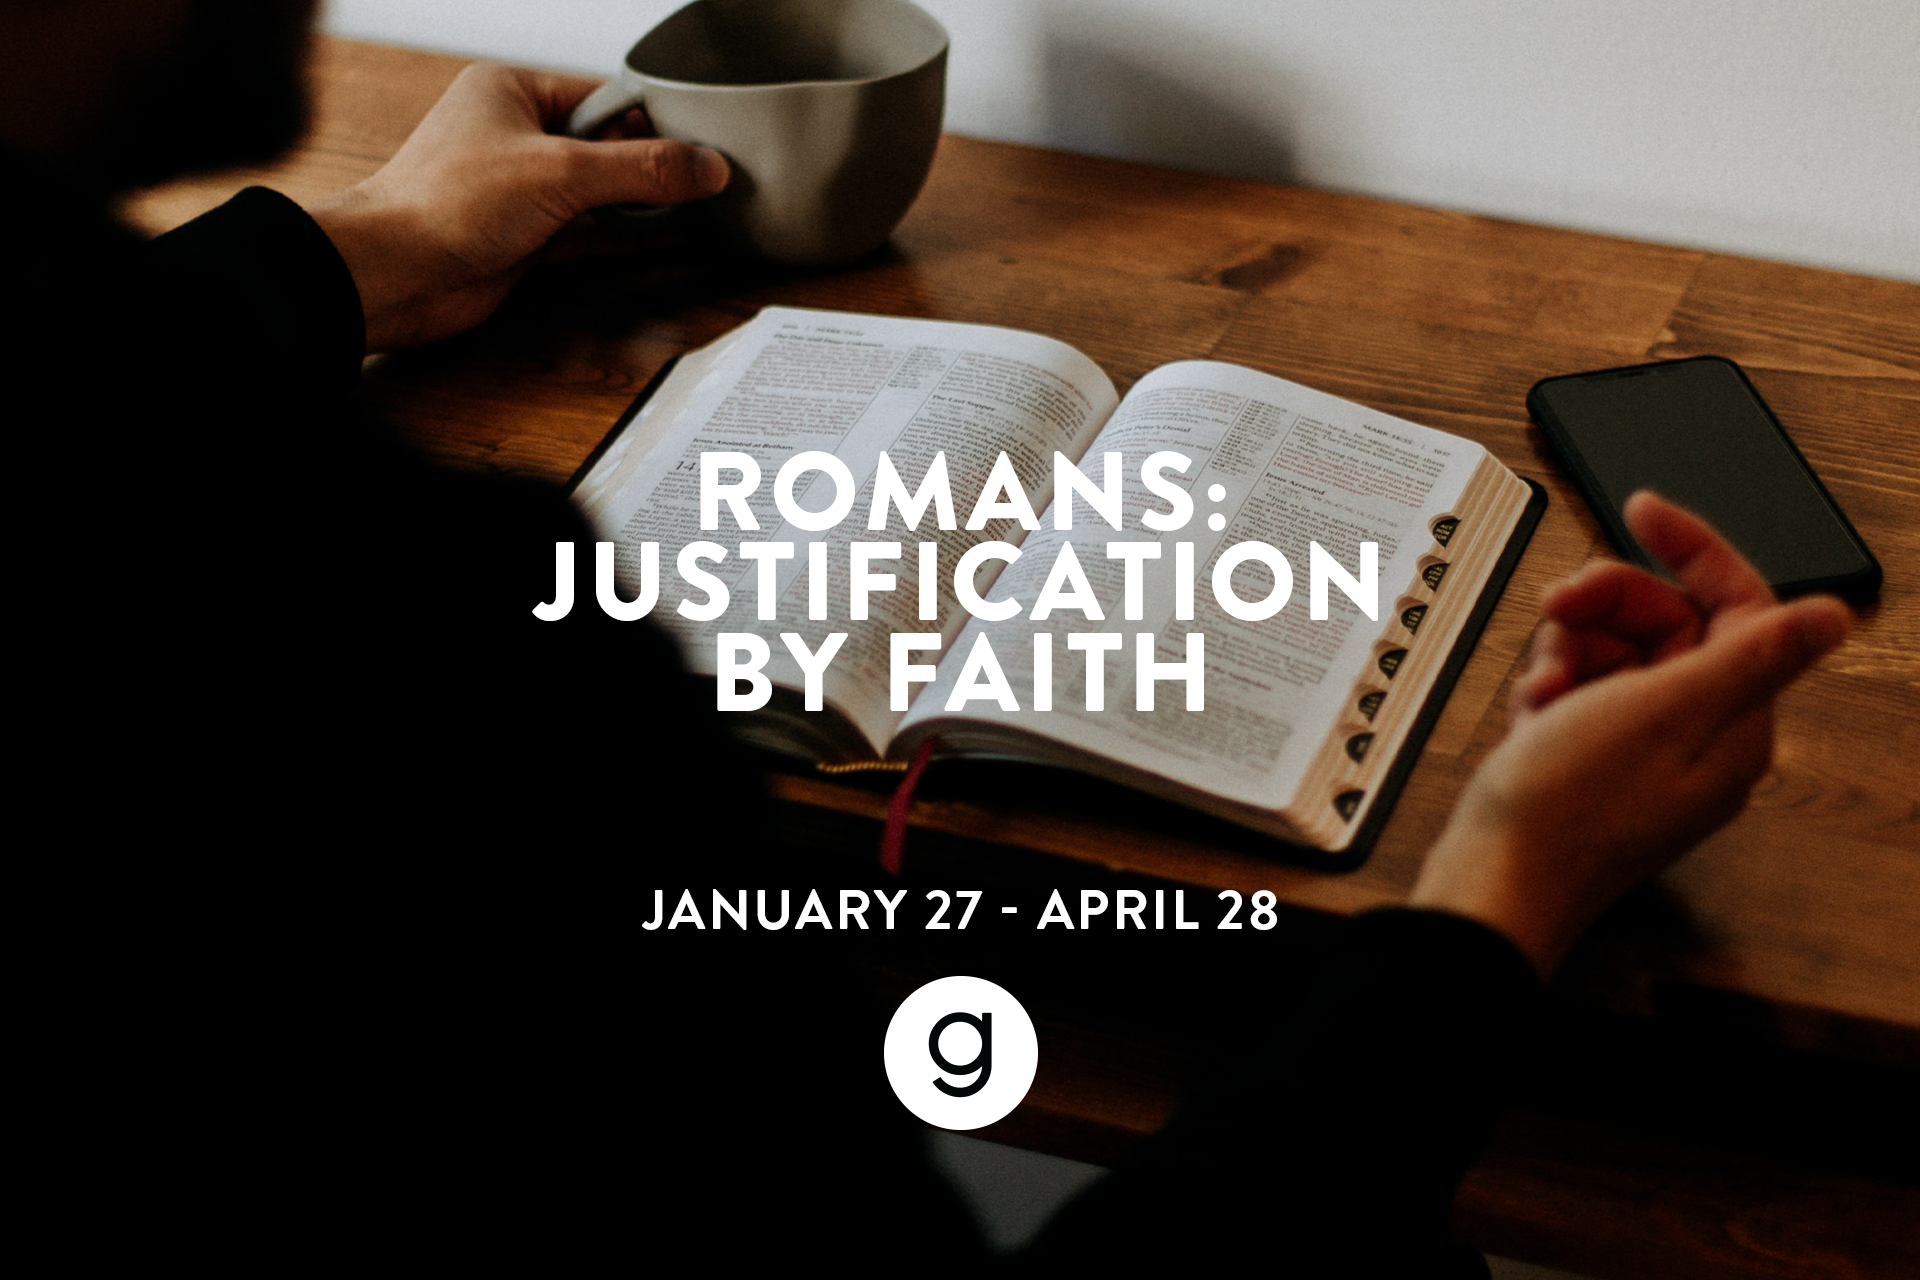 Link to Romans: Justification by Faith detail page